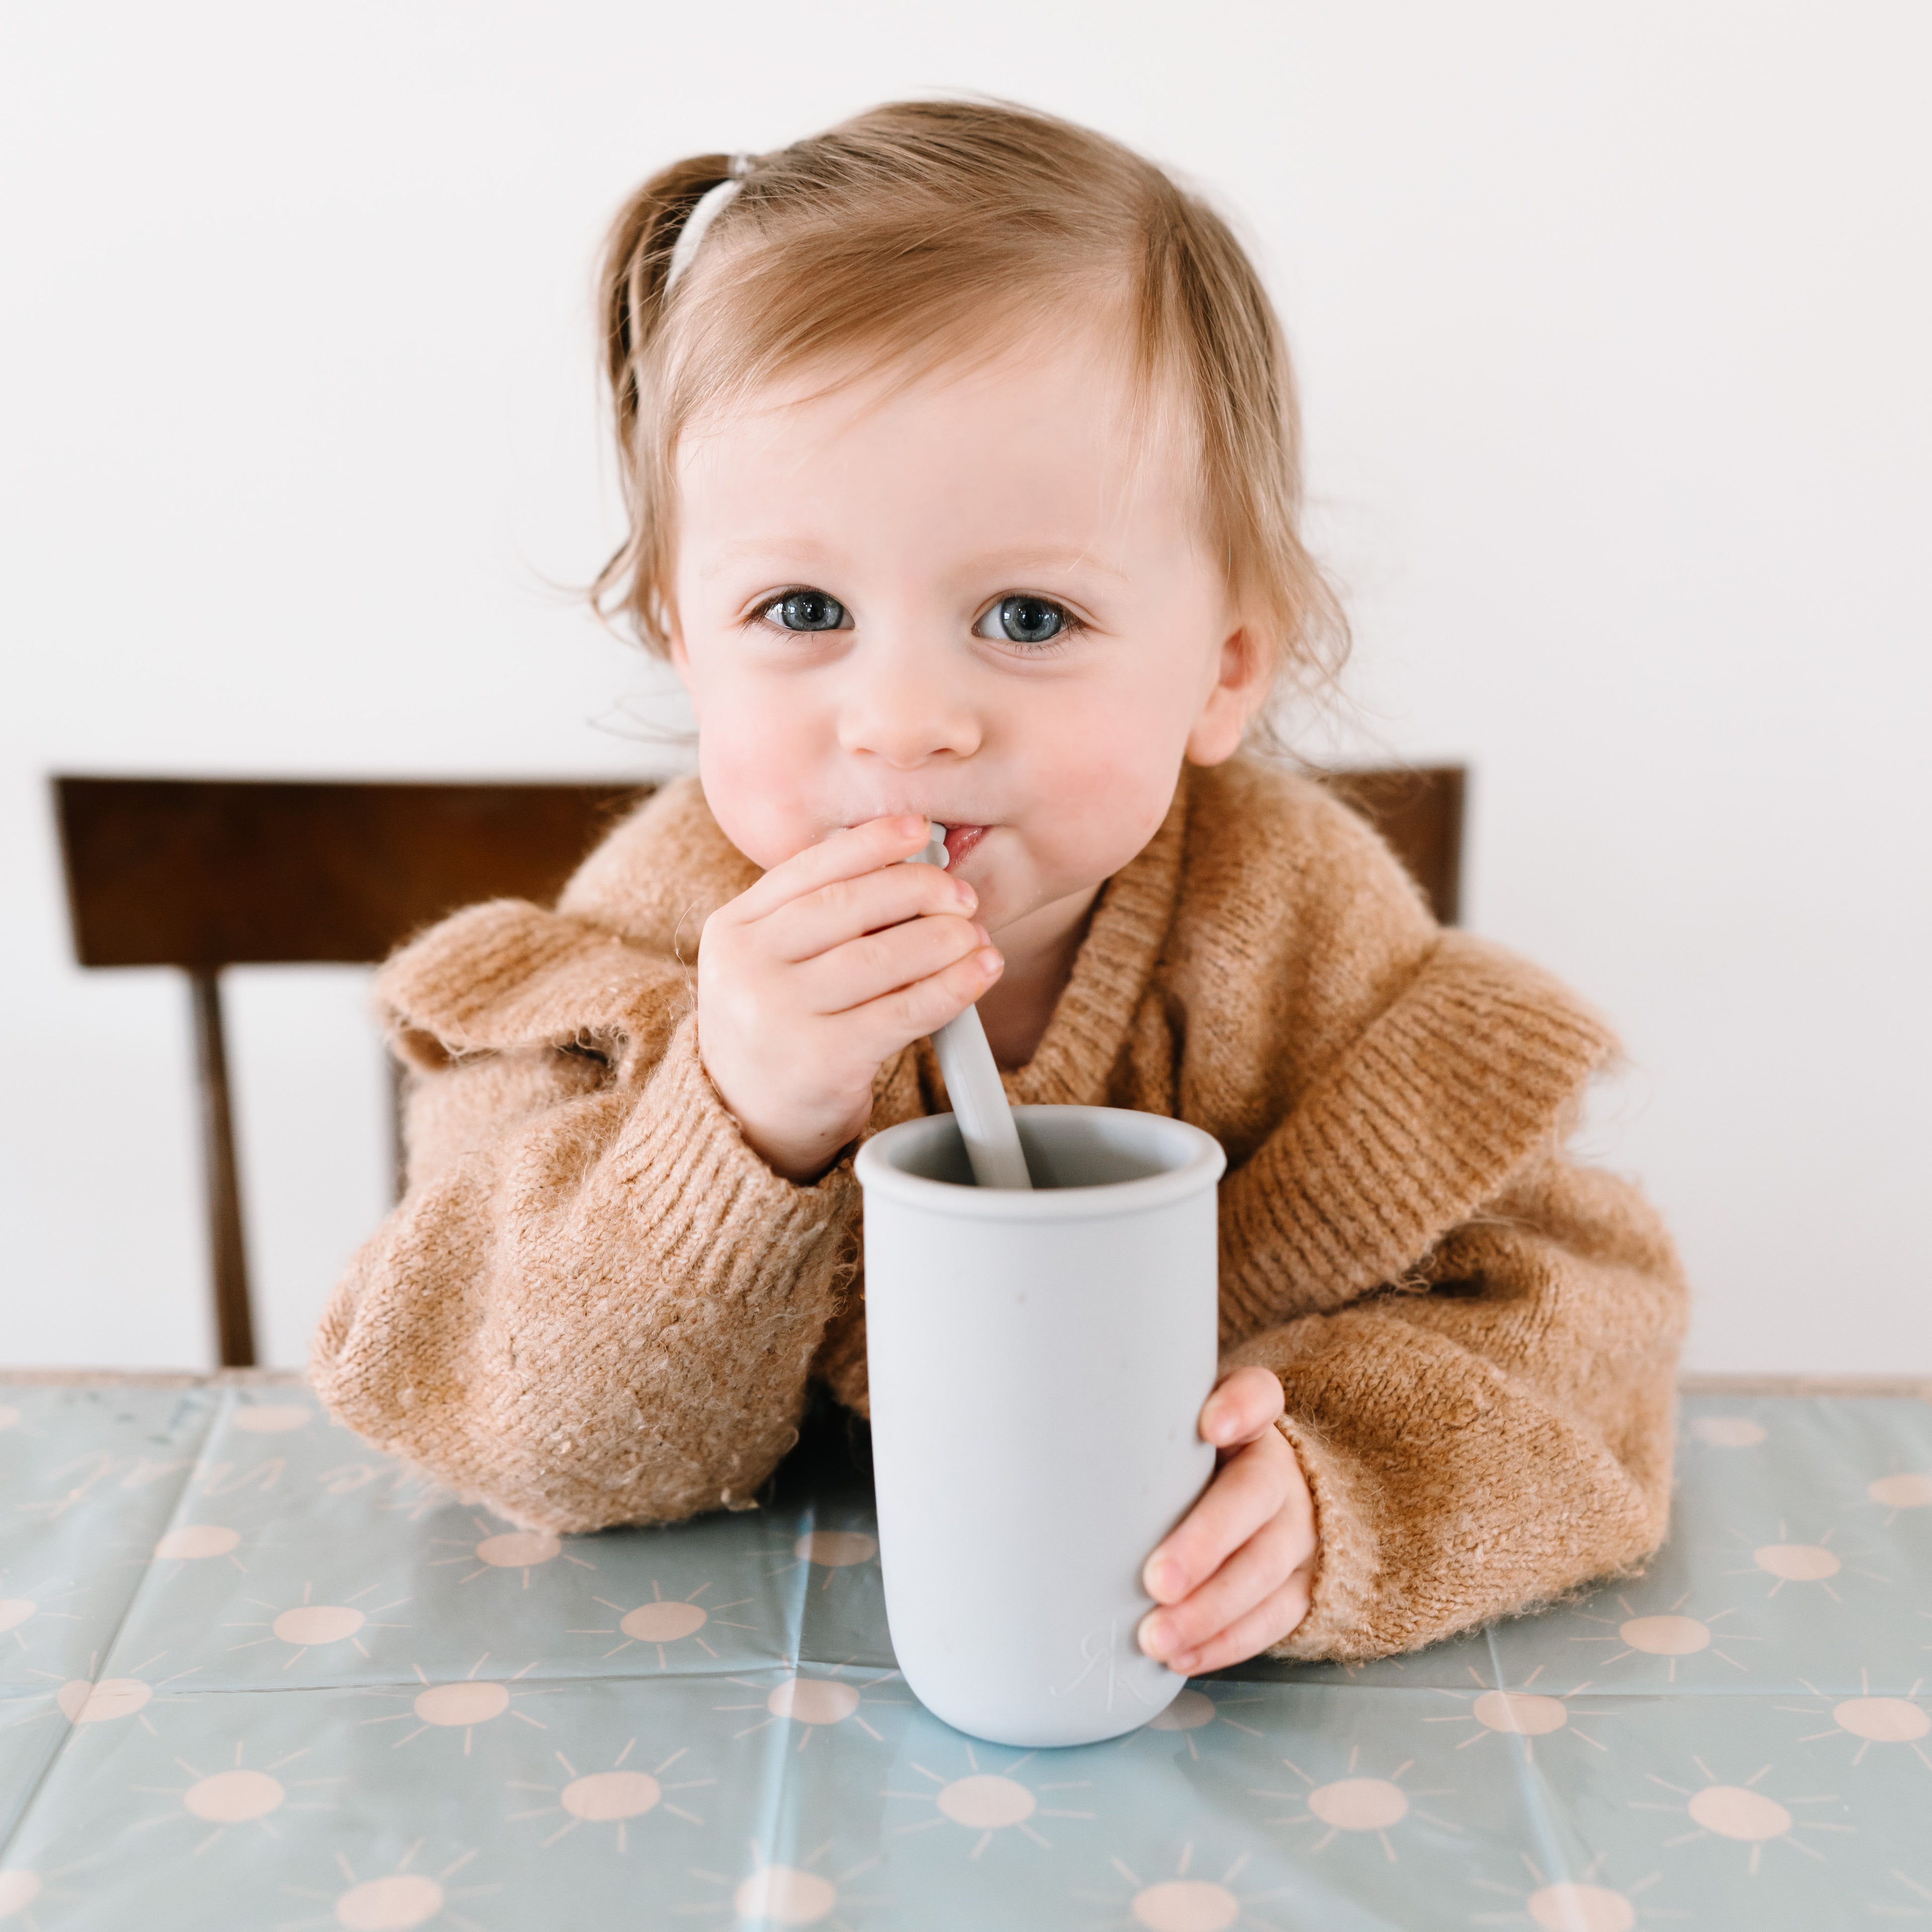 Toddler sitting at the table using the Cutie Cup and Shark Cutie Straw.